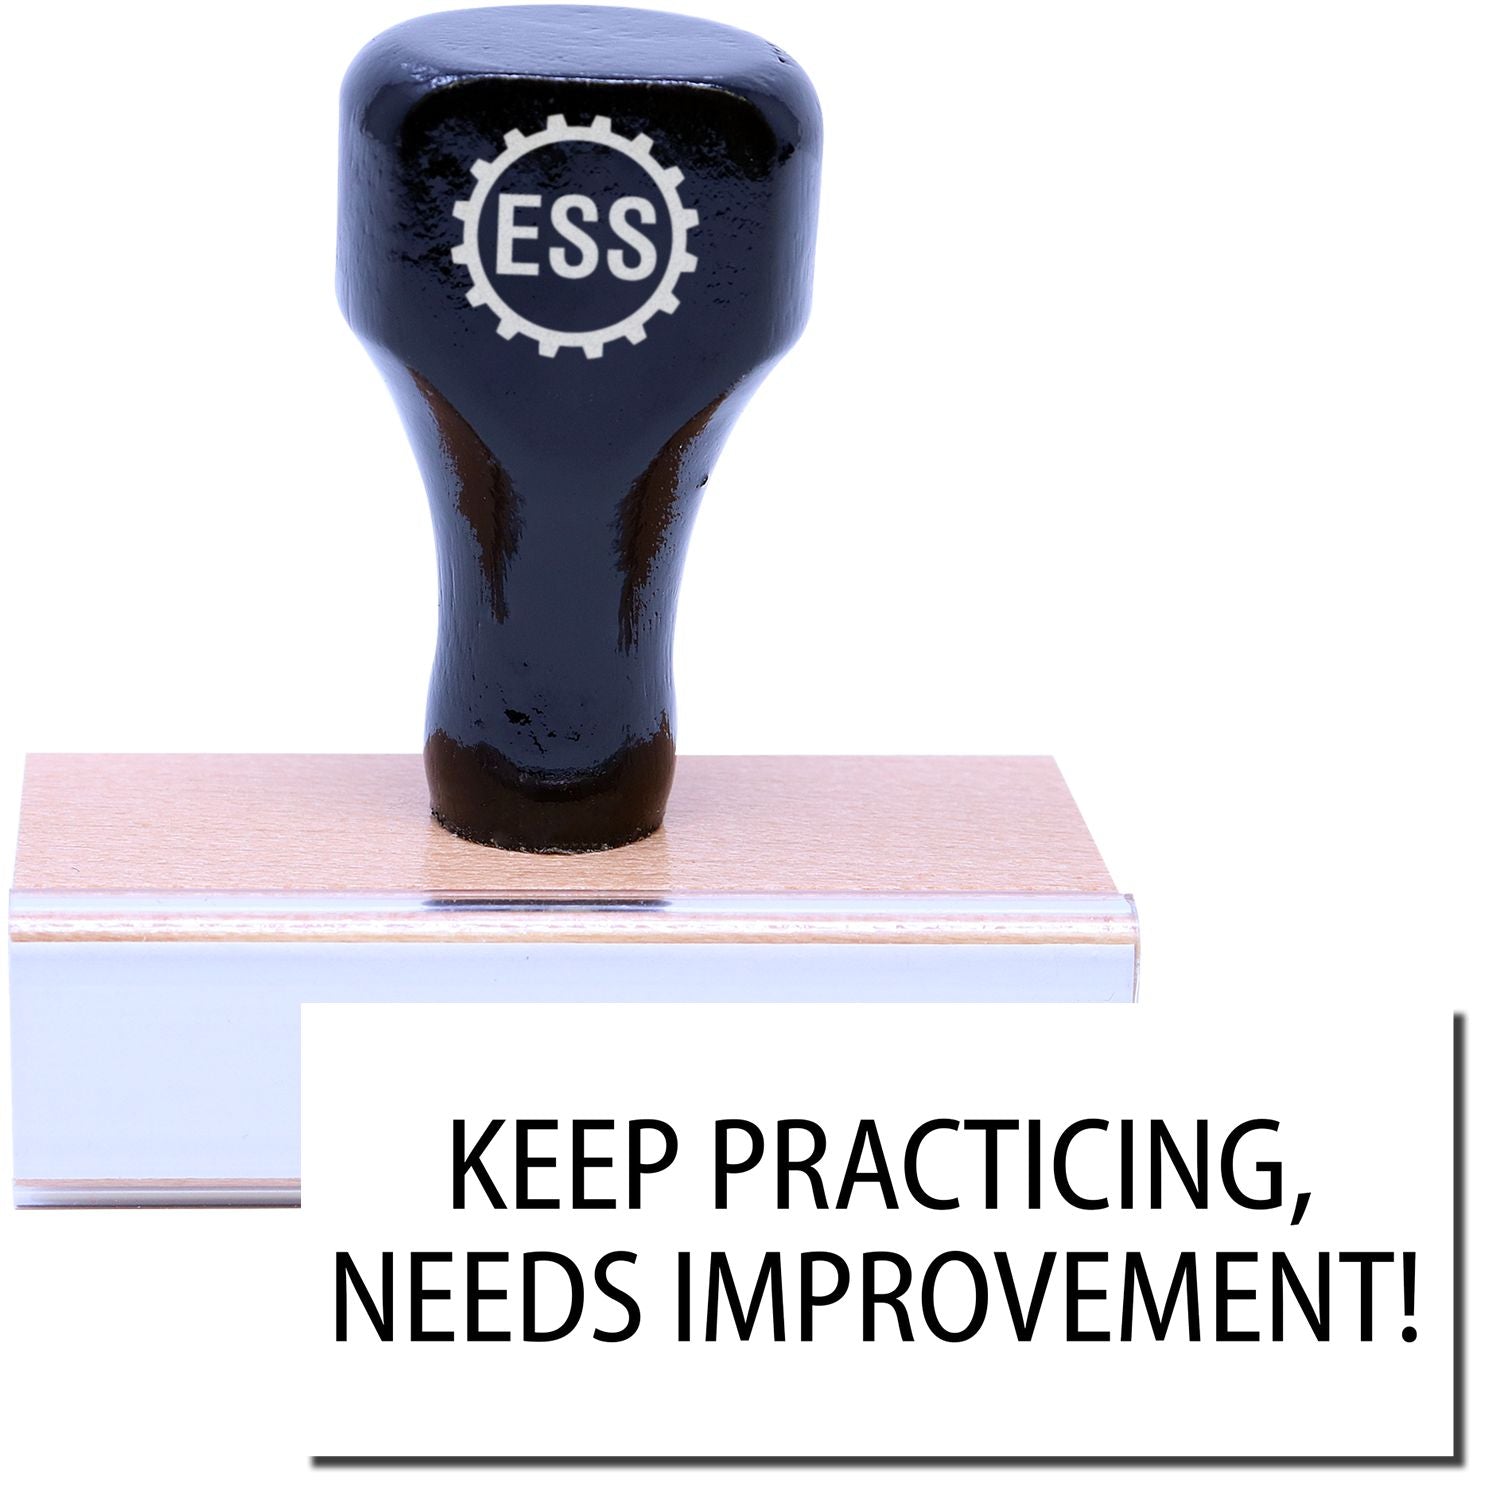 A stock office rubber stamp with a stamped image showing how the text "KEEP PRACTICING, NEEDS IMPROVEMENT!" in a large font is displayed after stamping.